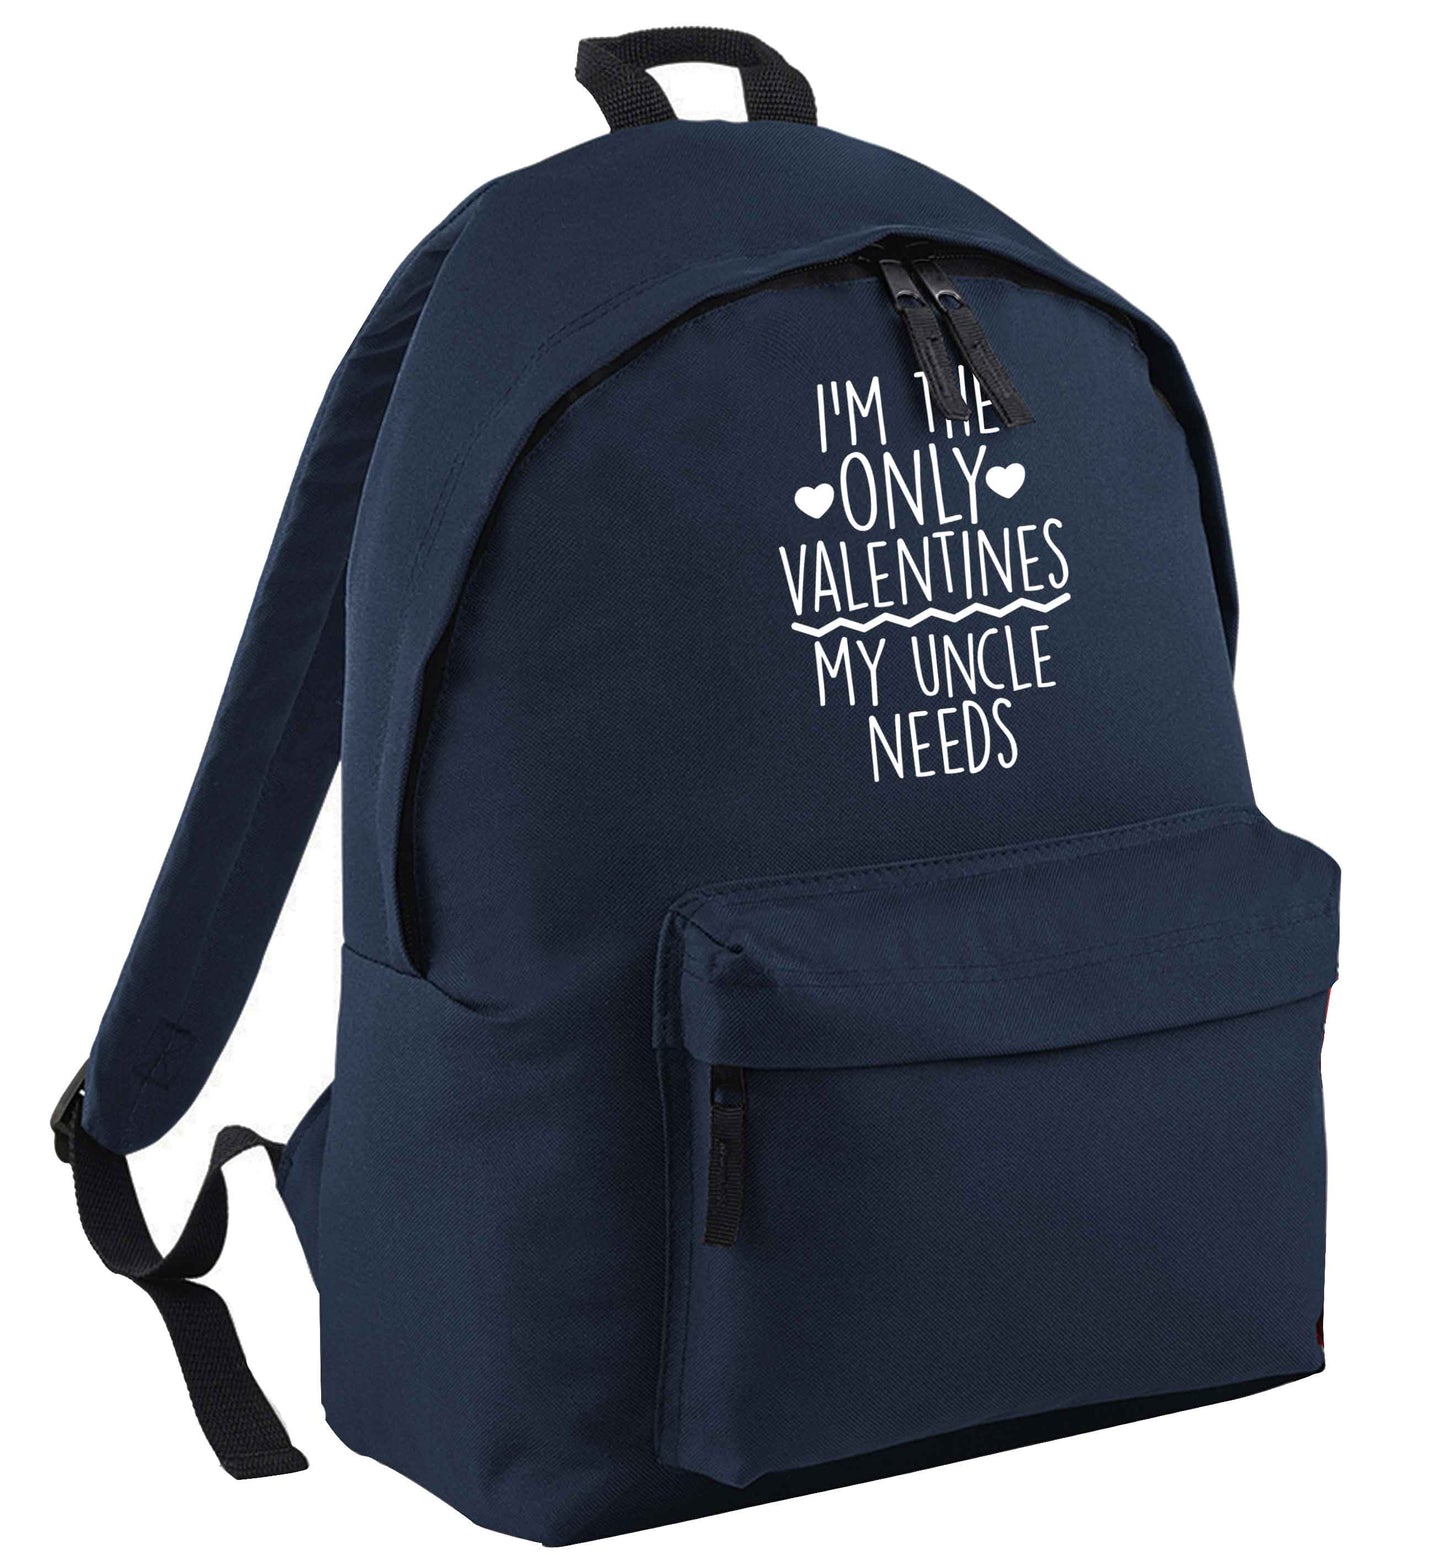 I'm the only valentines my uncle needs navy childrens backpack